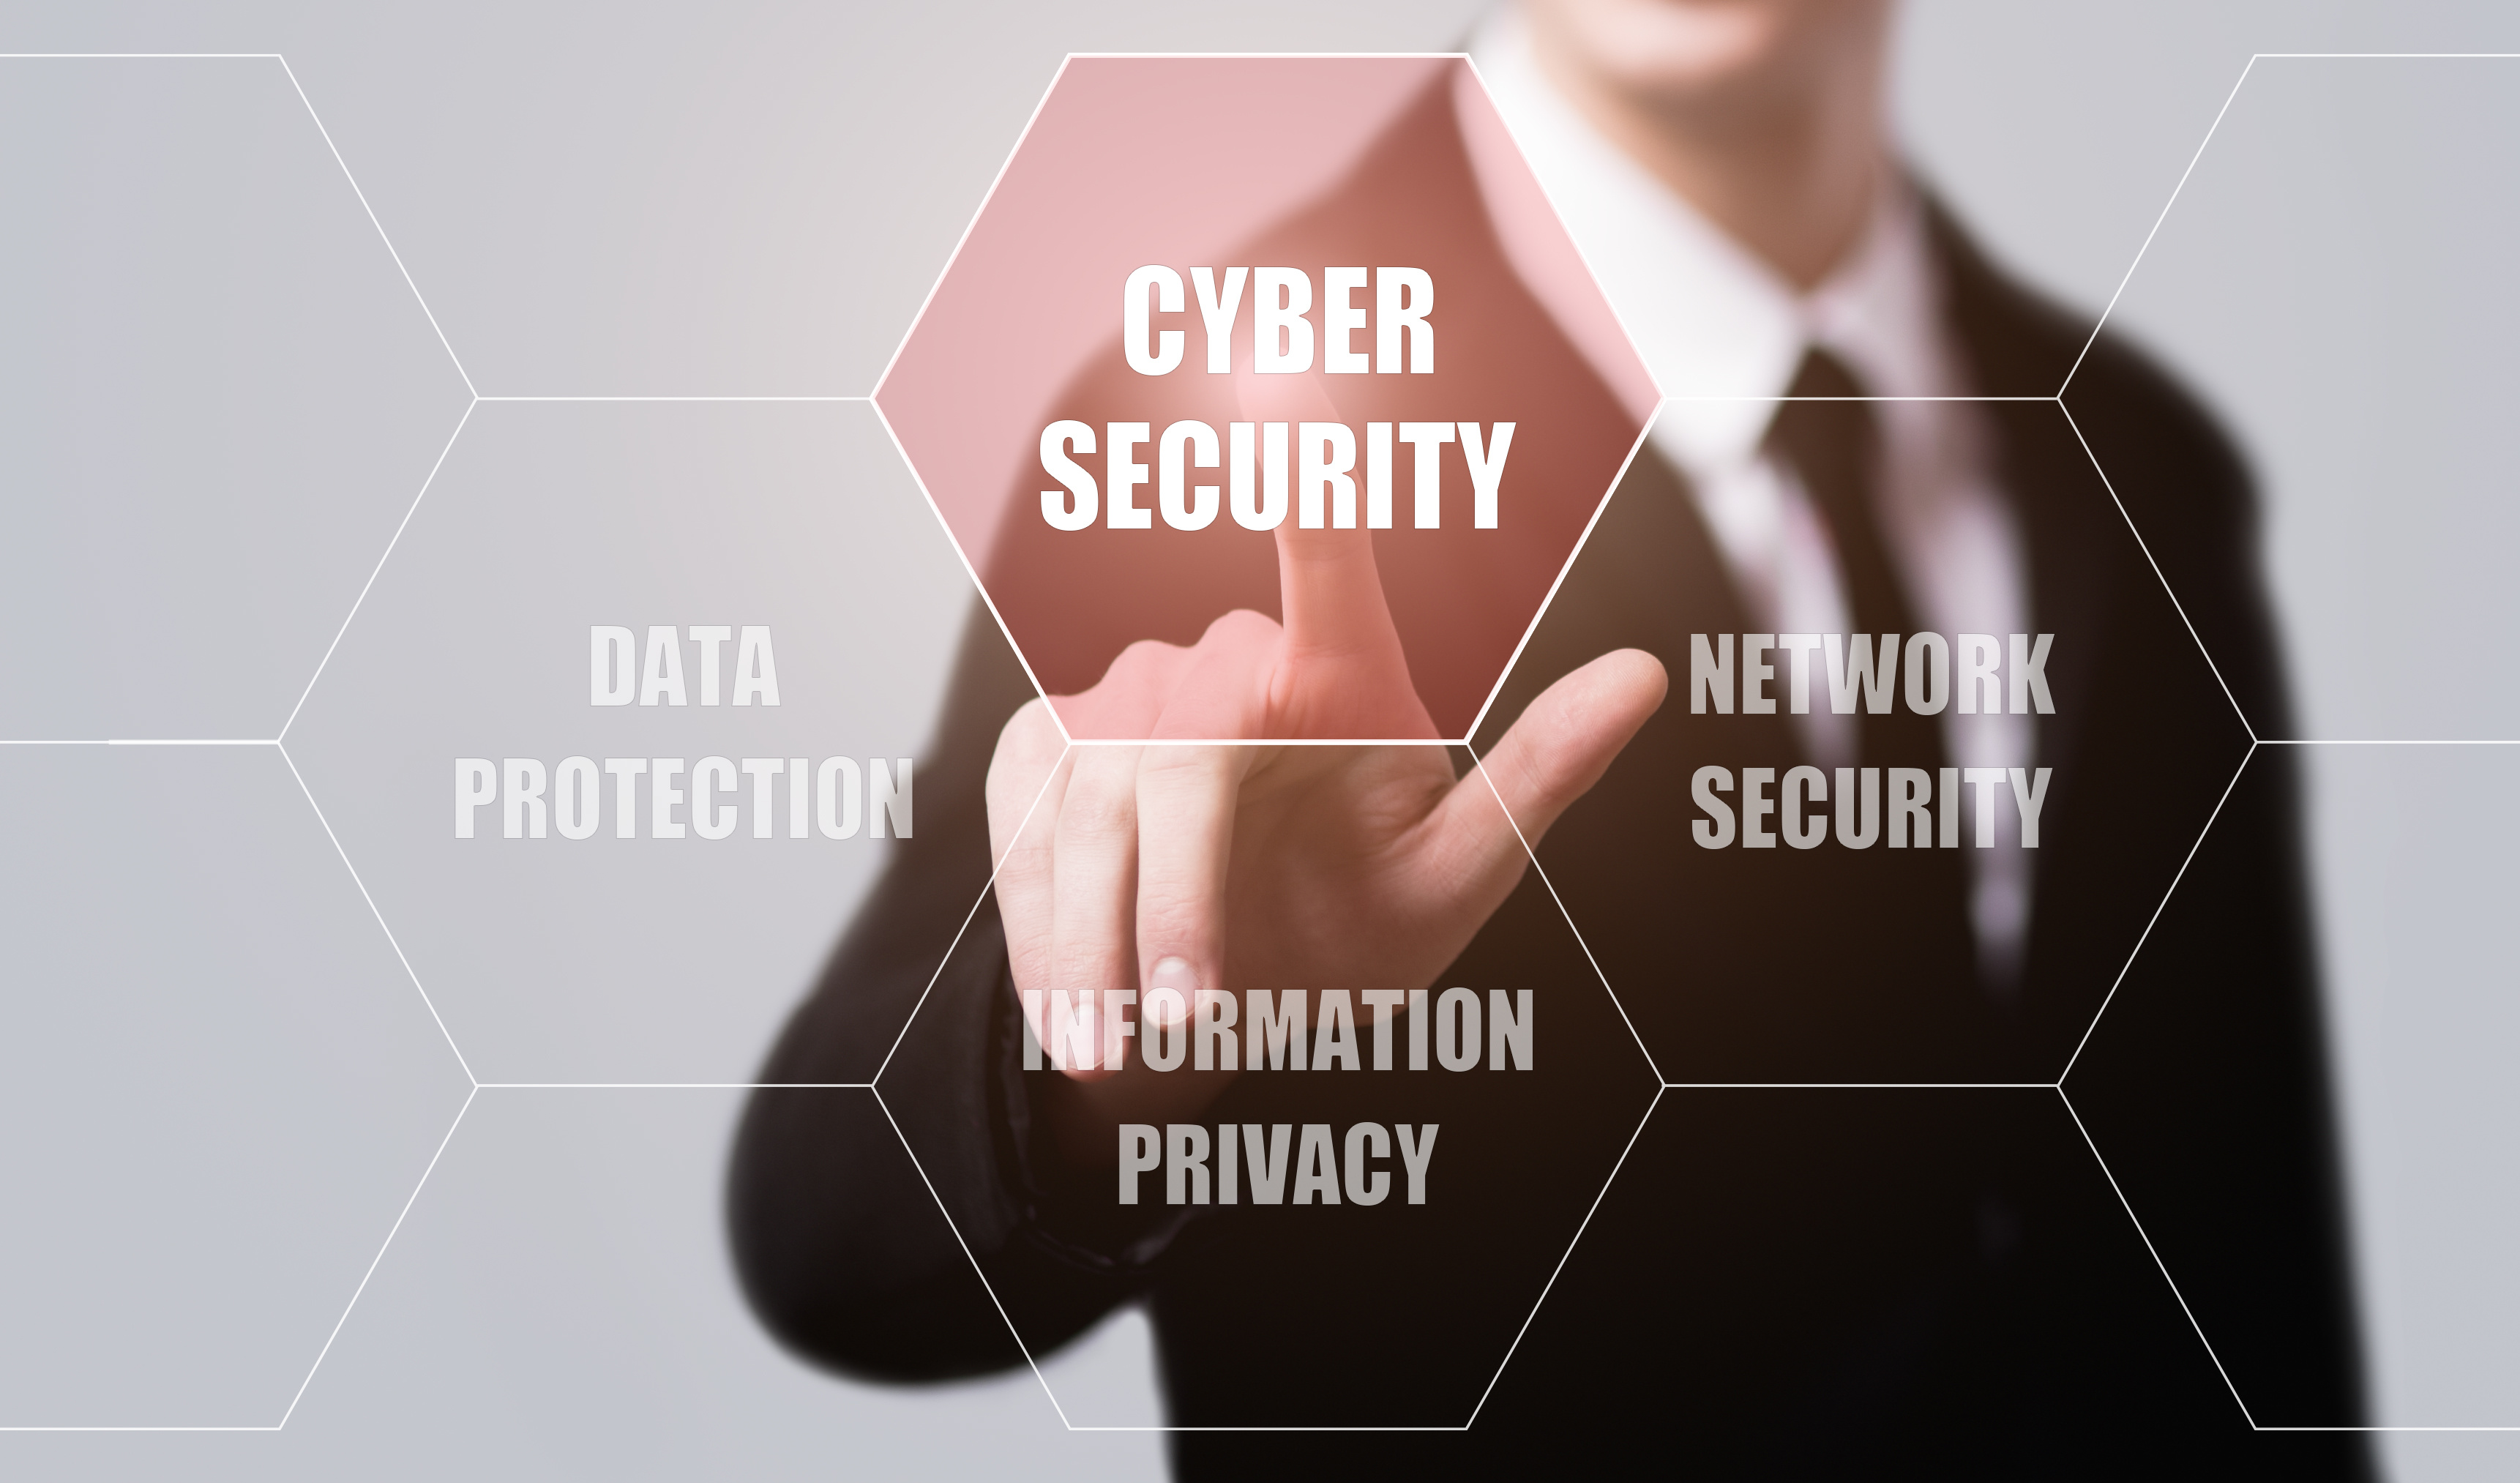 RCS discusses latest security breaches and cyber attacks, and what RCS can do to help protect your company.